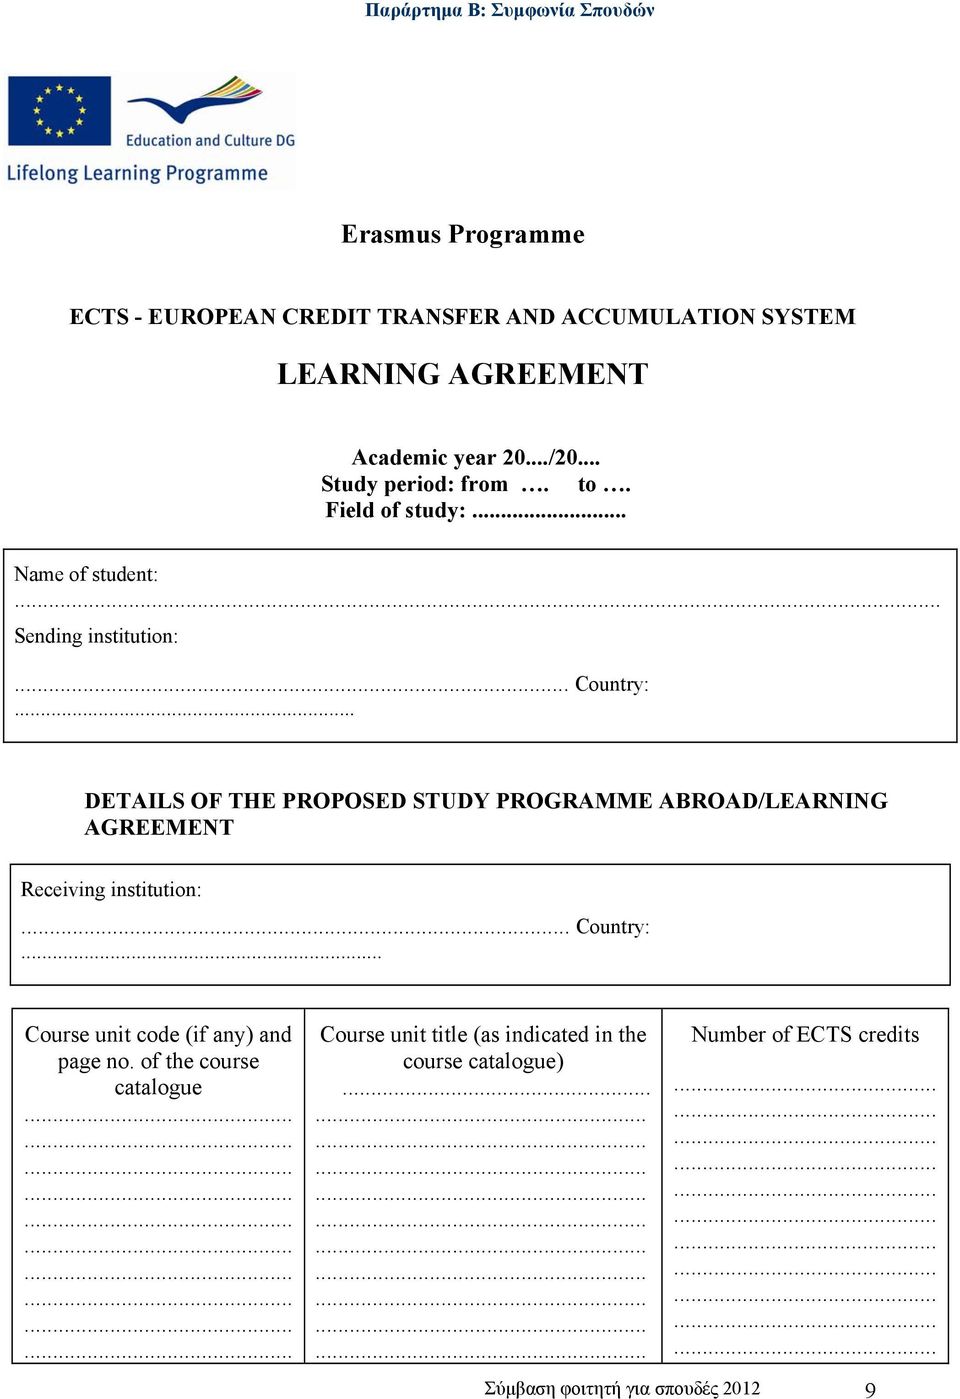 PROPOSED STUDY PROGRAMME ABROAD/LEARNING AGREEMENT Receiving institution: Country: Course unit code (if any) and page no of